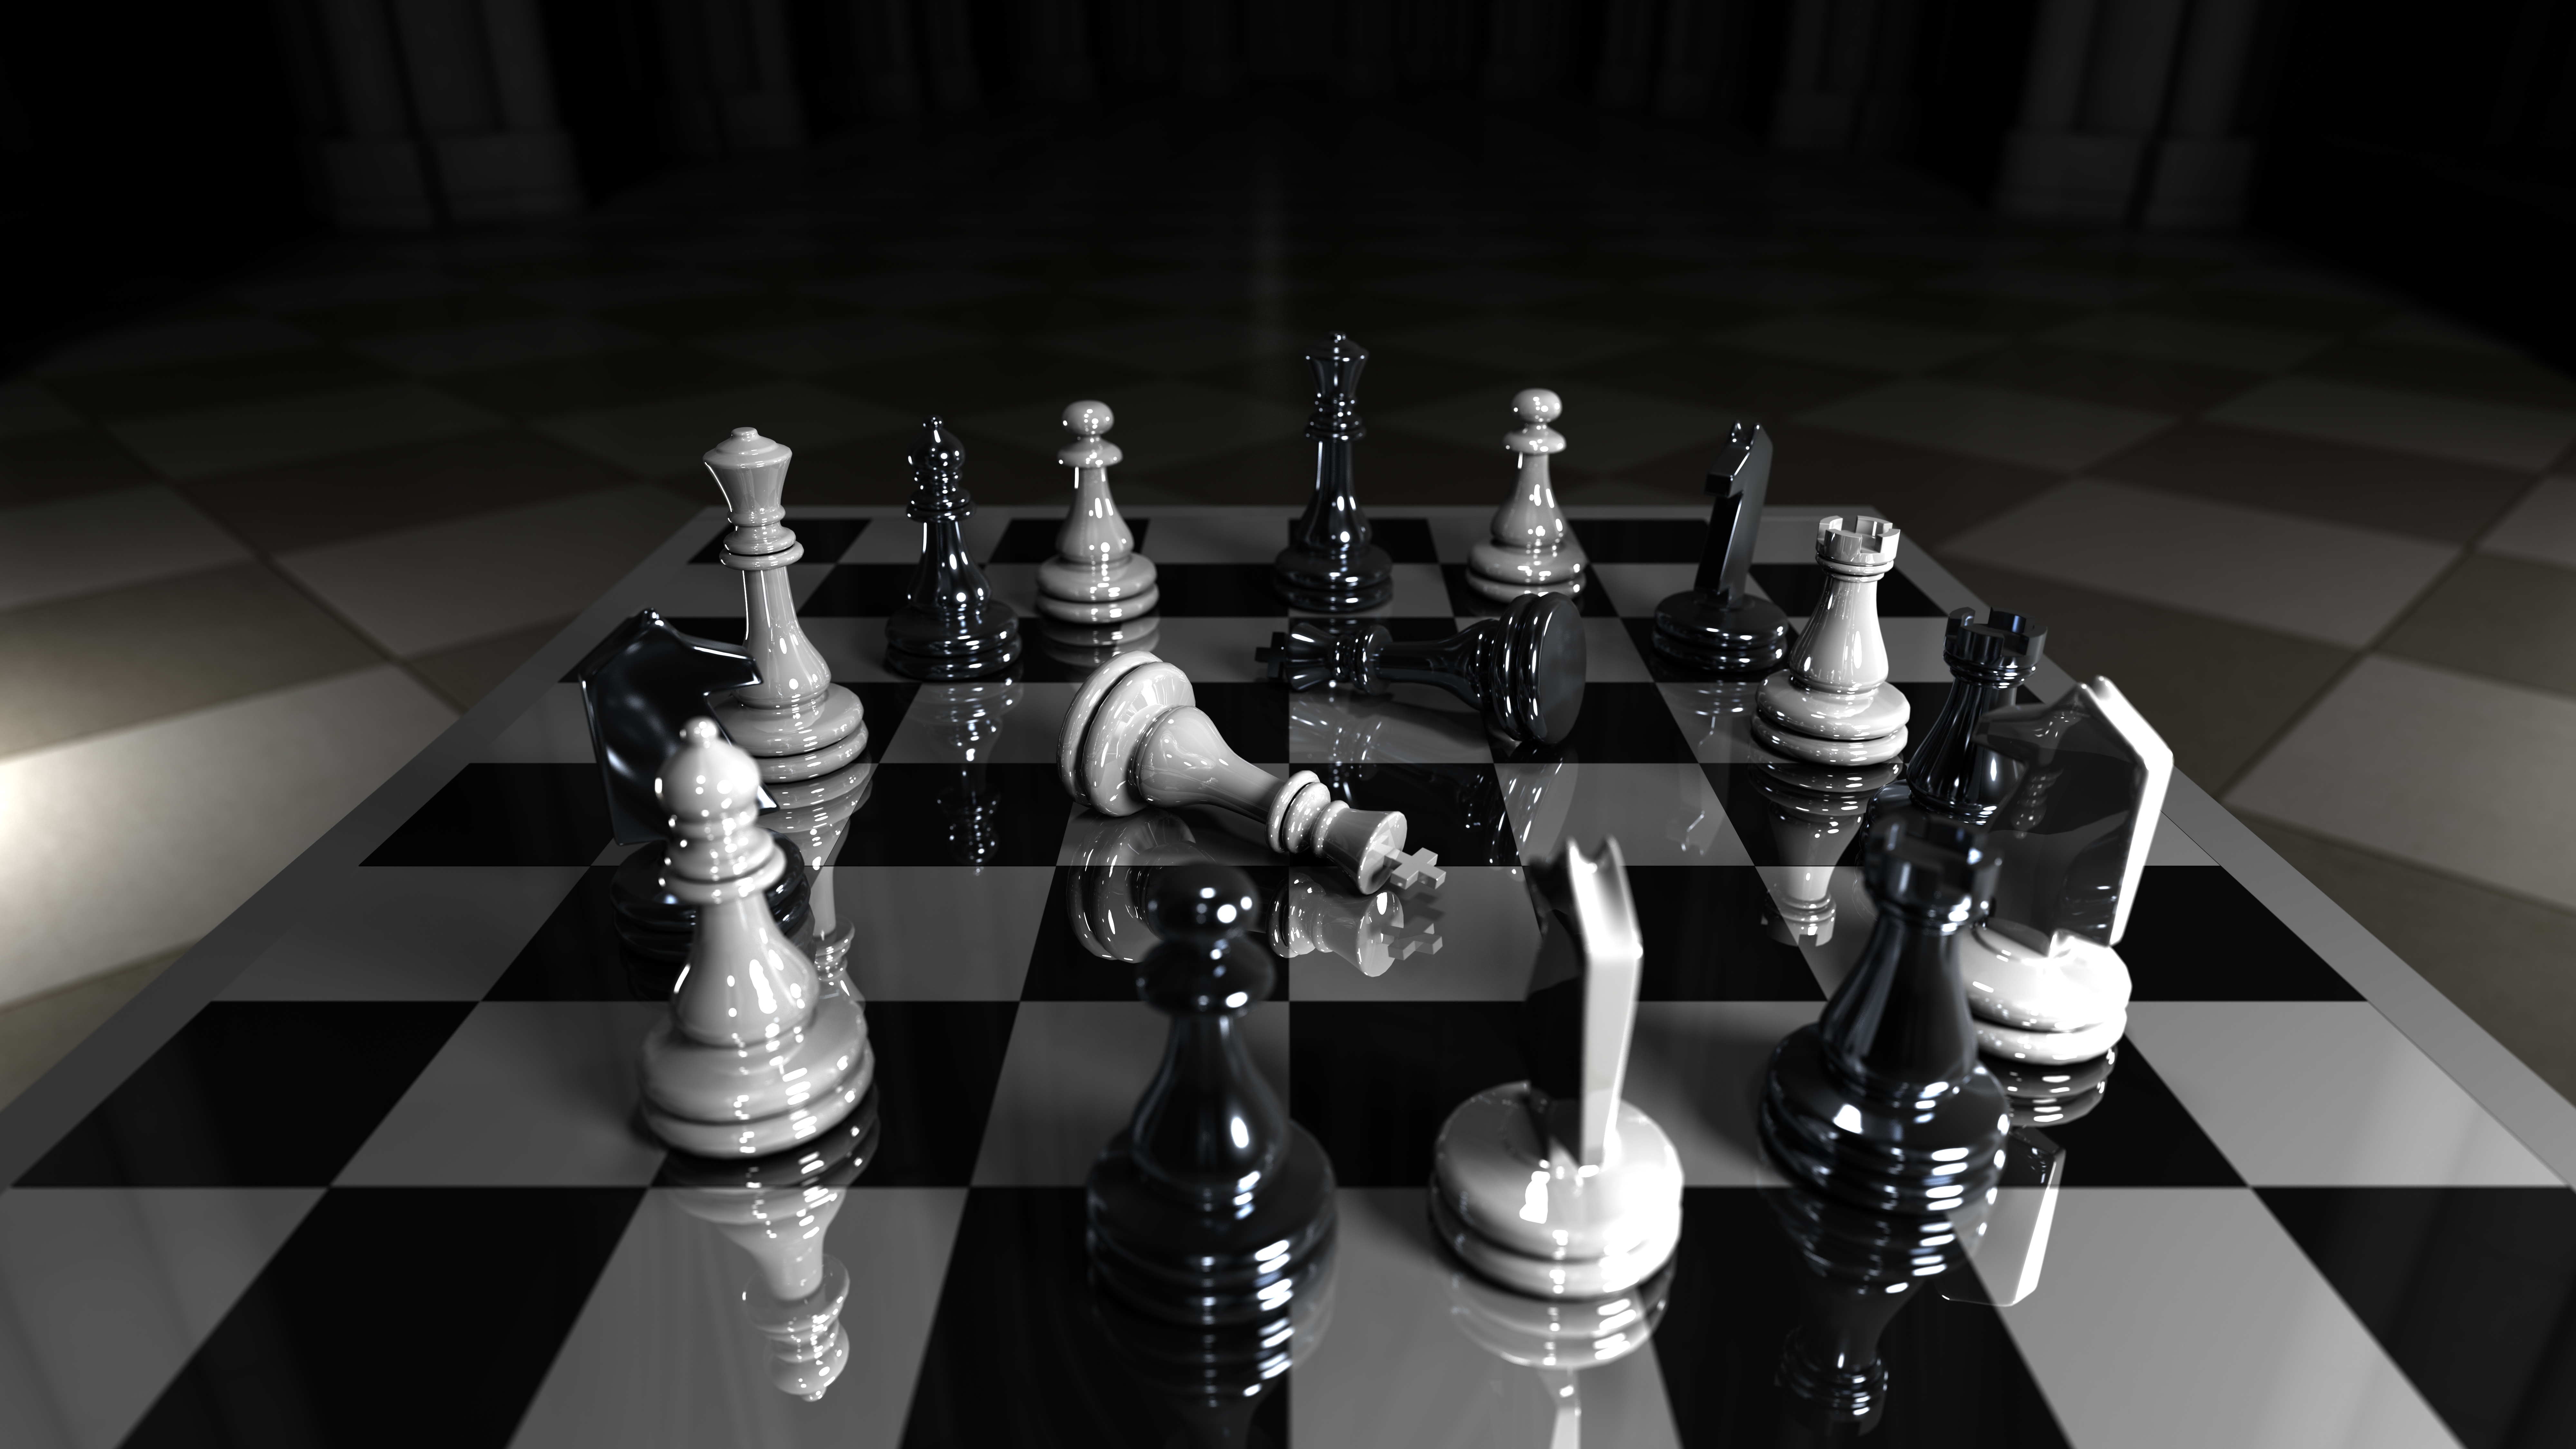 Chess Board Knight HD Wallpapers Stock Illustration - Illustration of  knight, wallpapers: 167125530